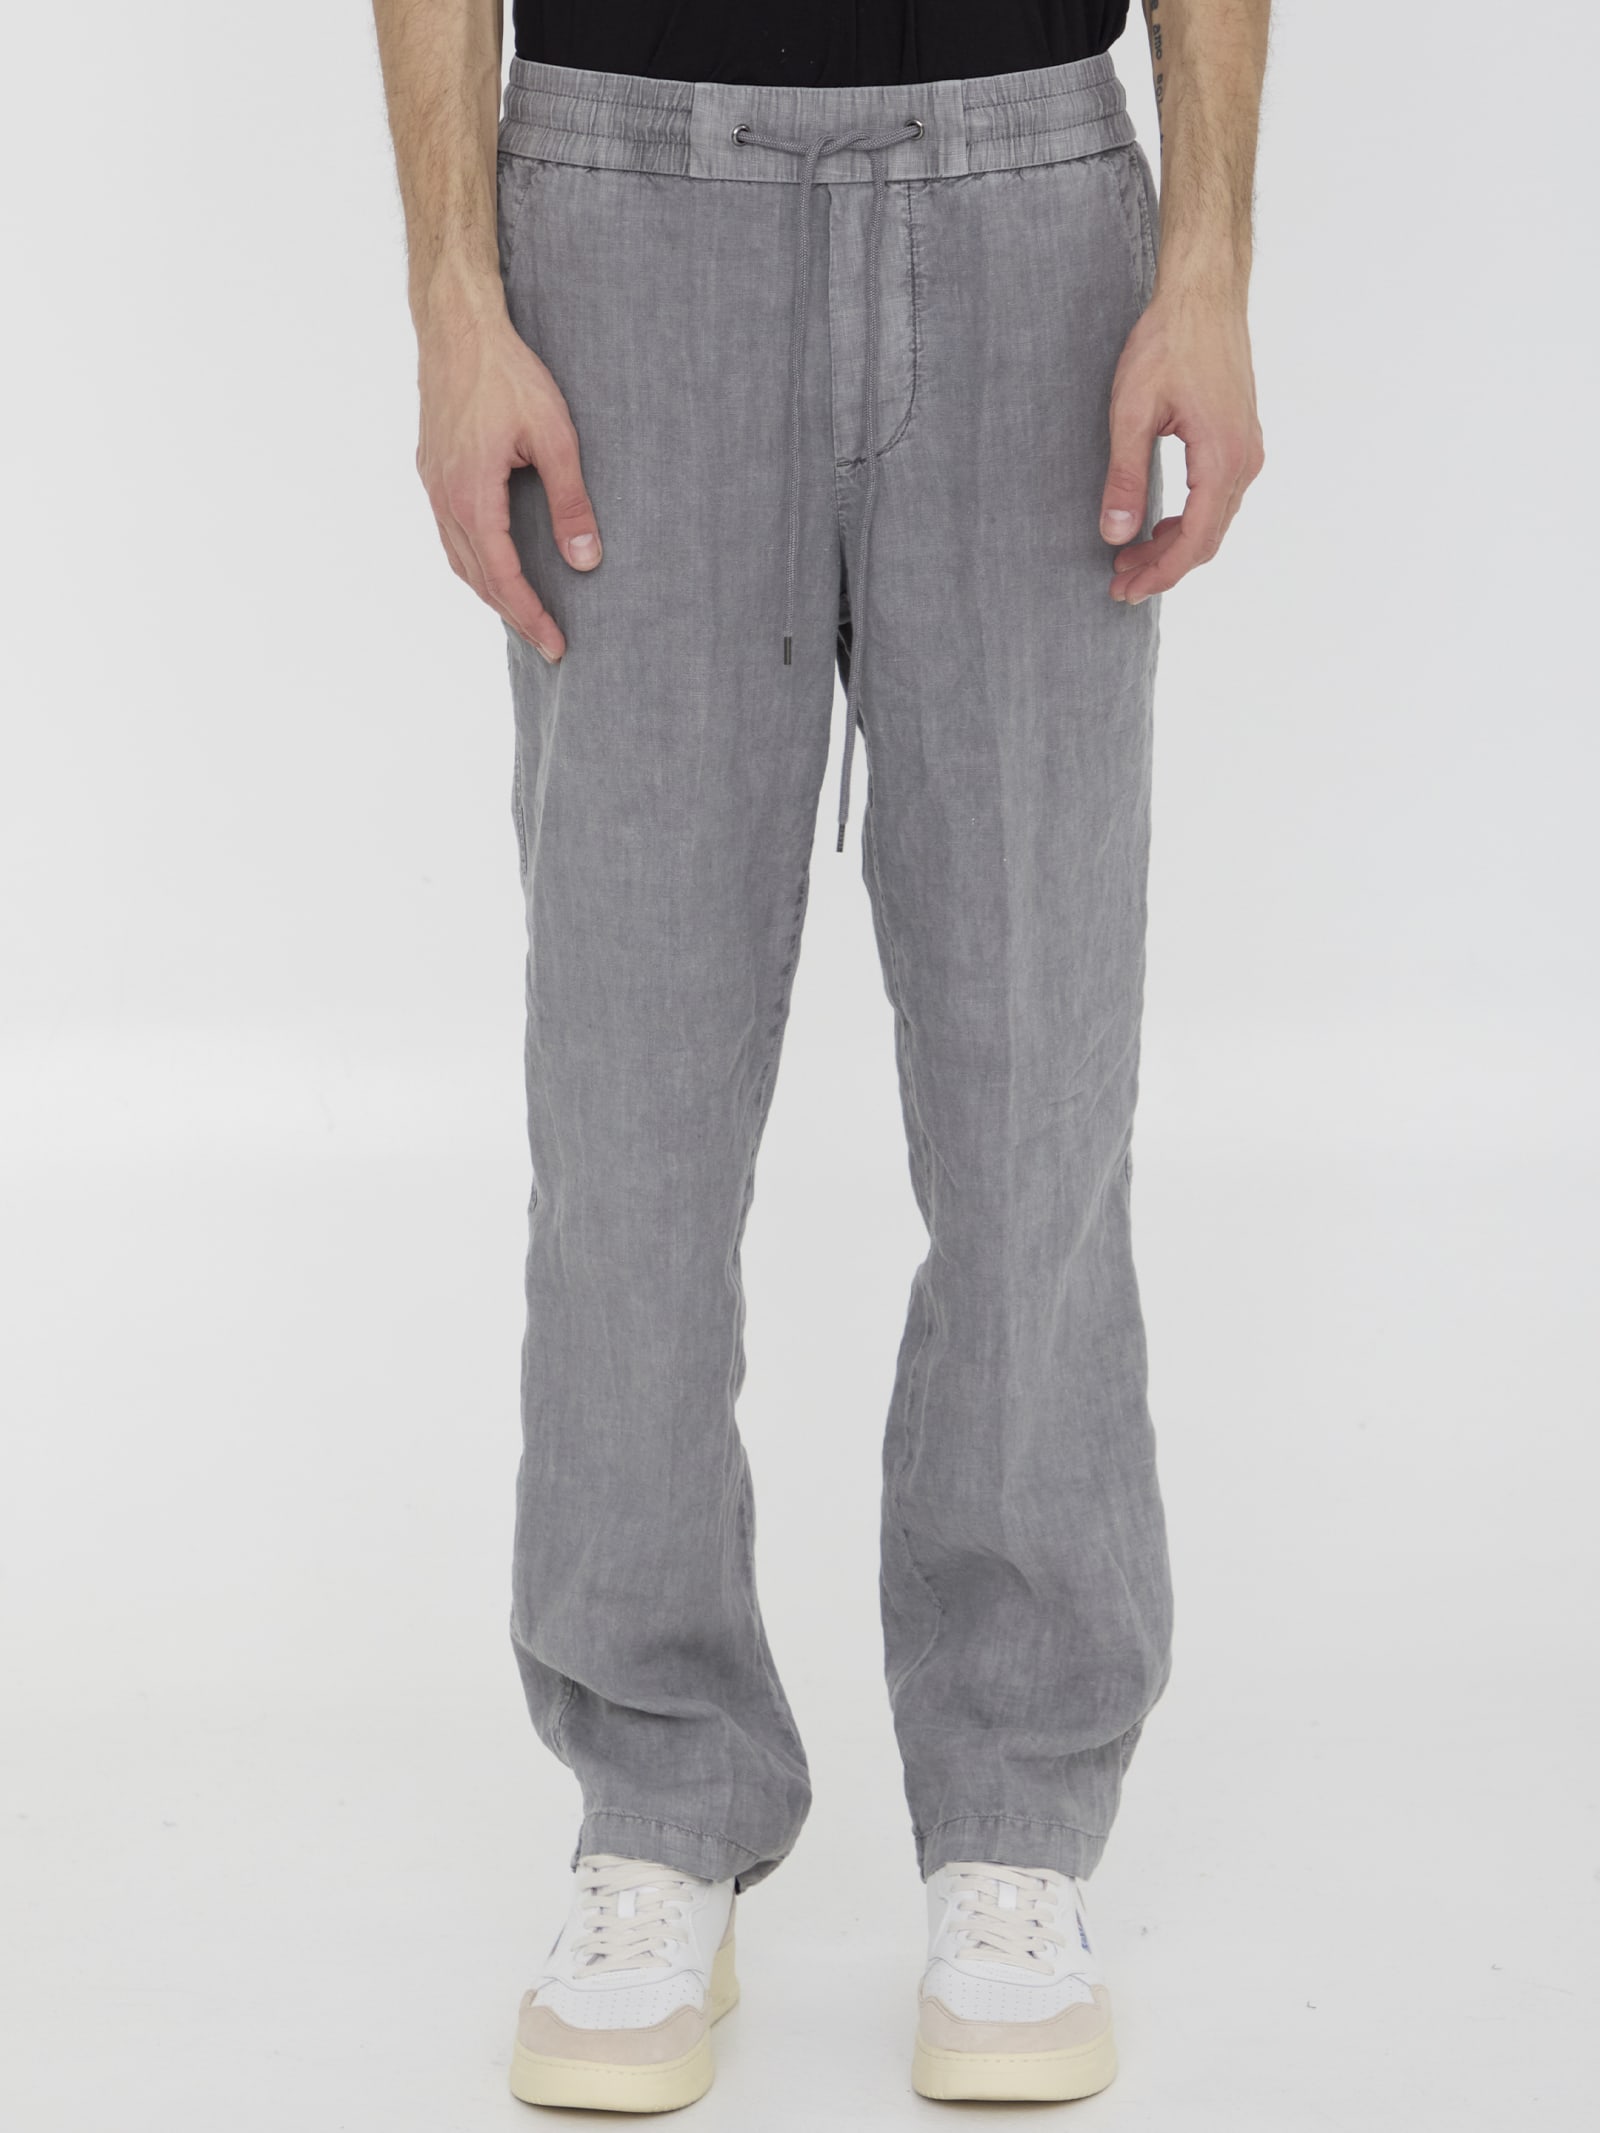 James Perse Linen Pants In Gray